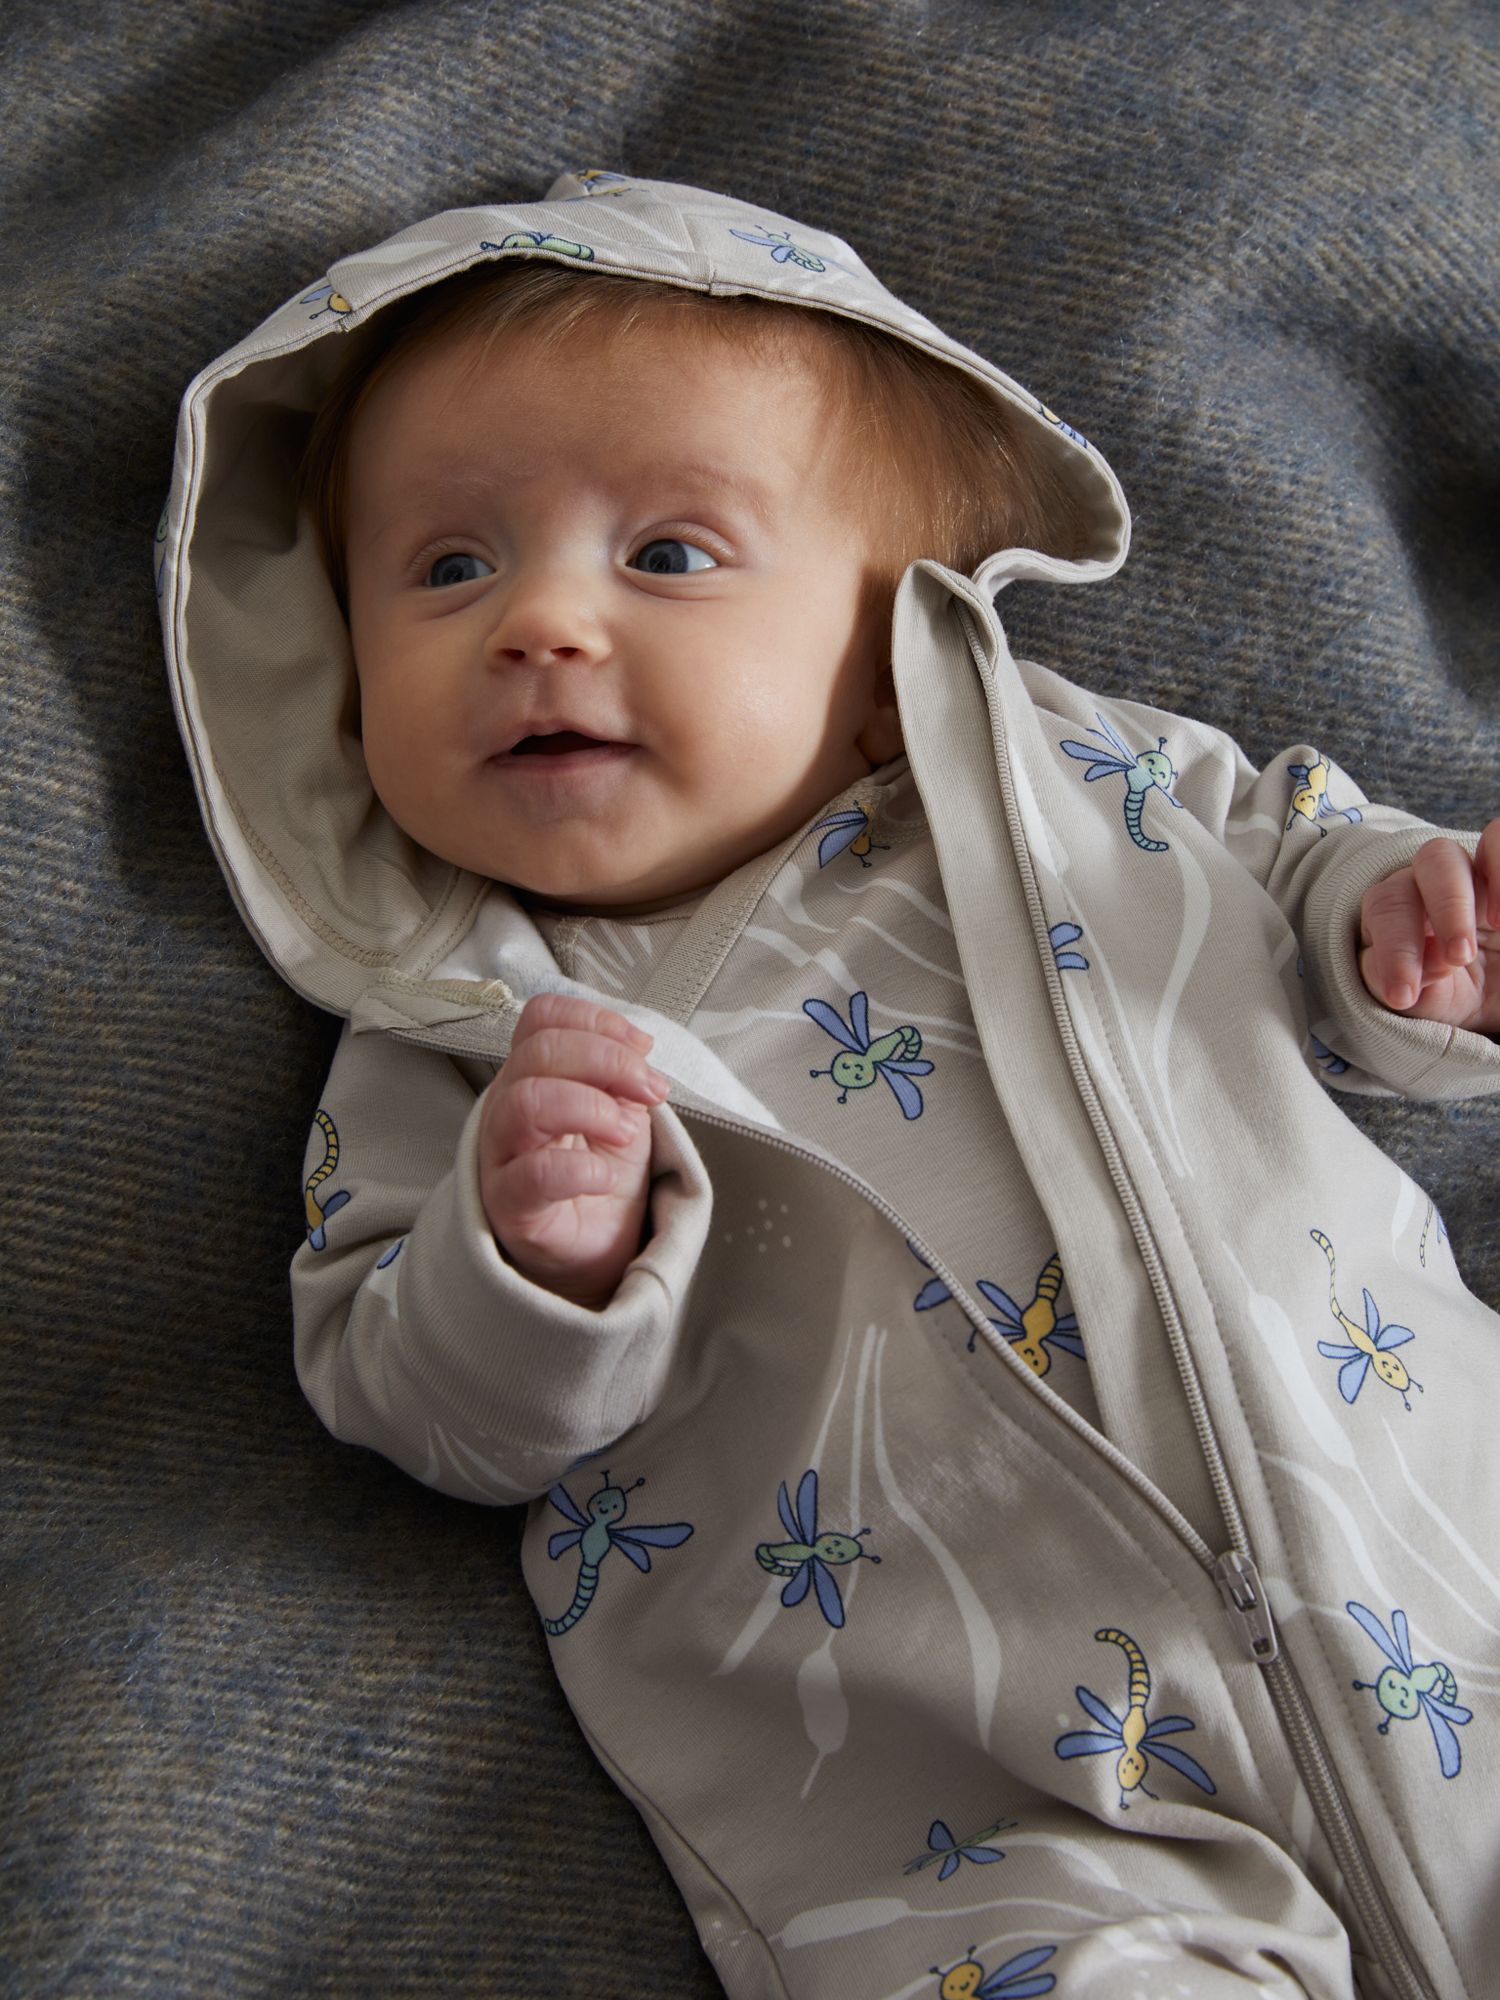 Buy Polarn O. Pyret Baby Organic Cotton Blend Dragonfly Print Hooded All In One, Natural Online at johnlewis.com